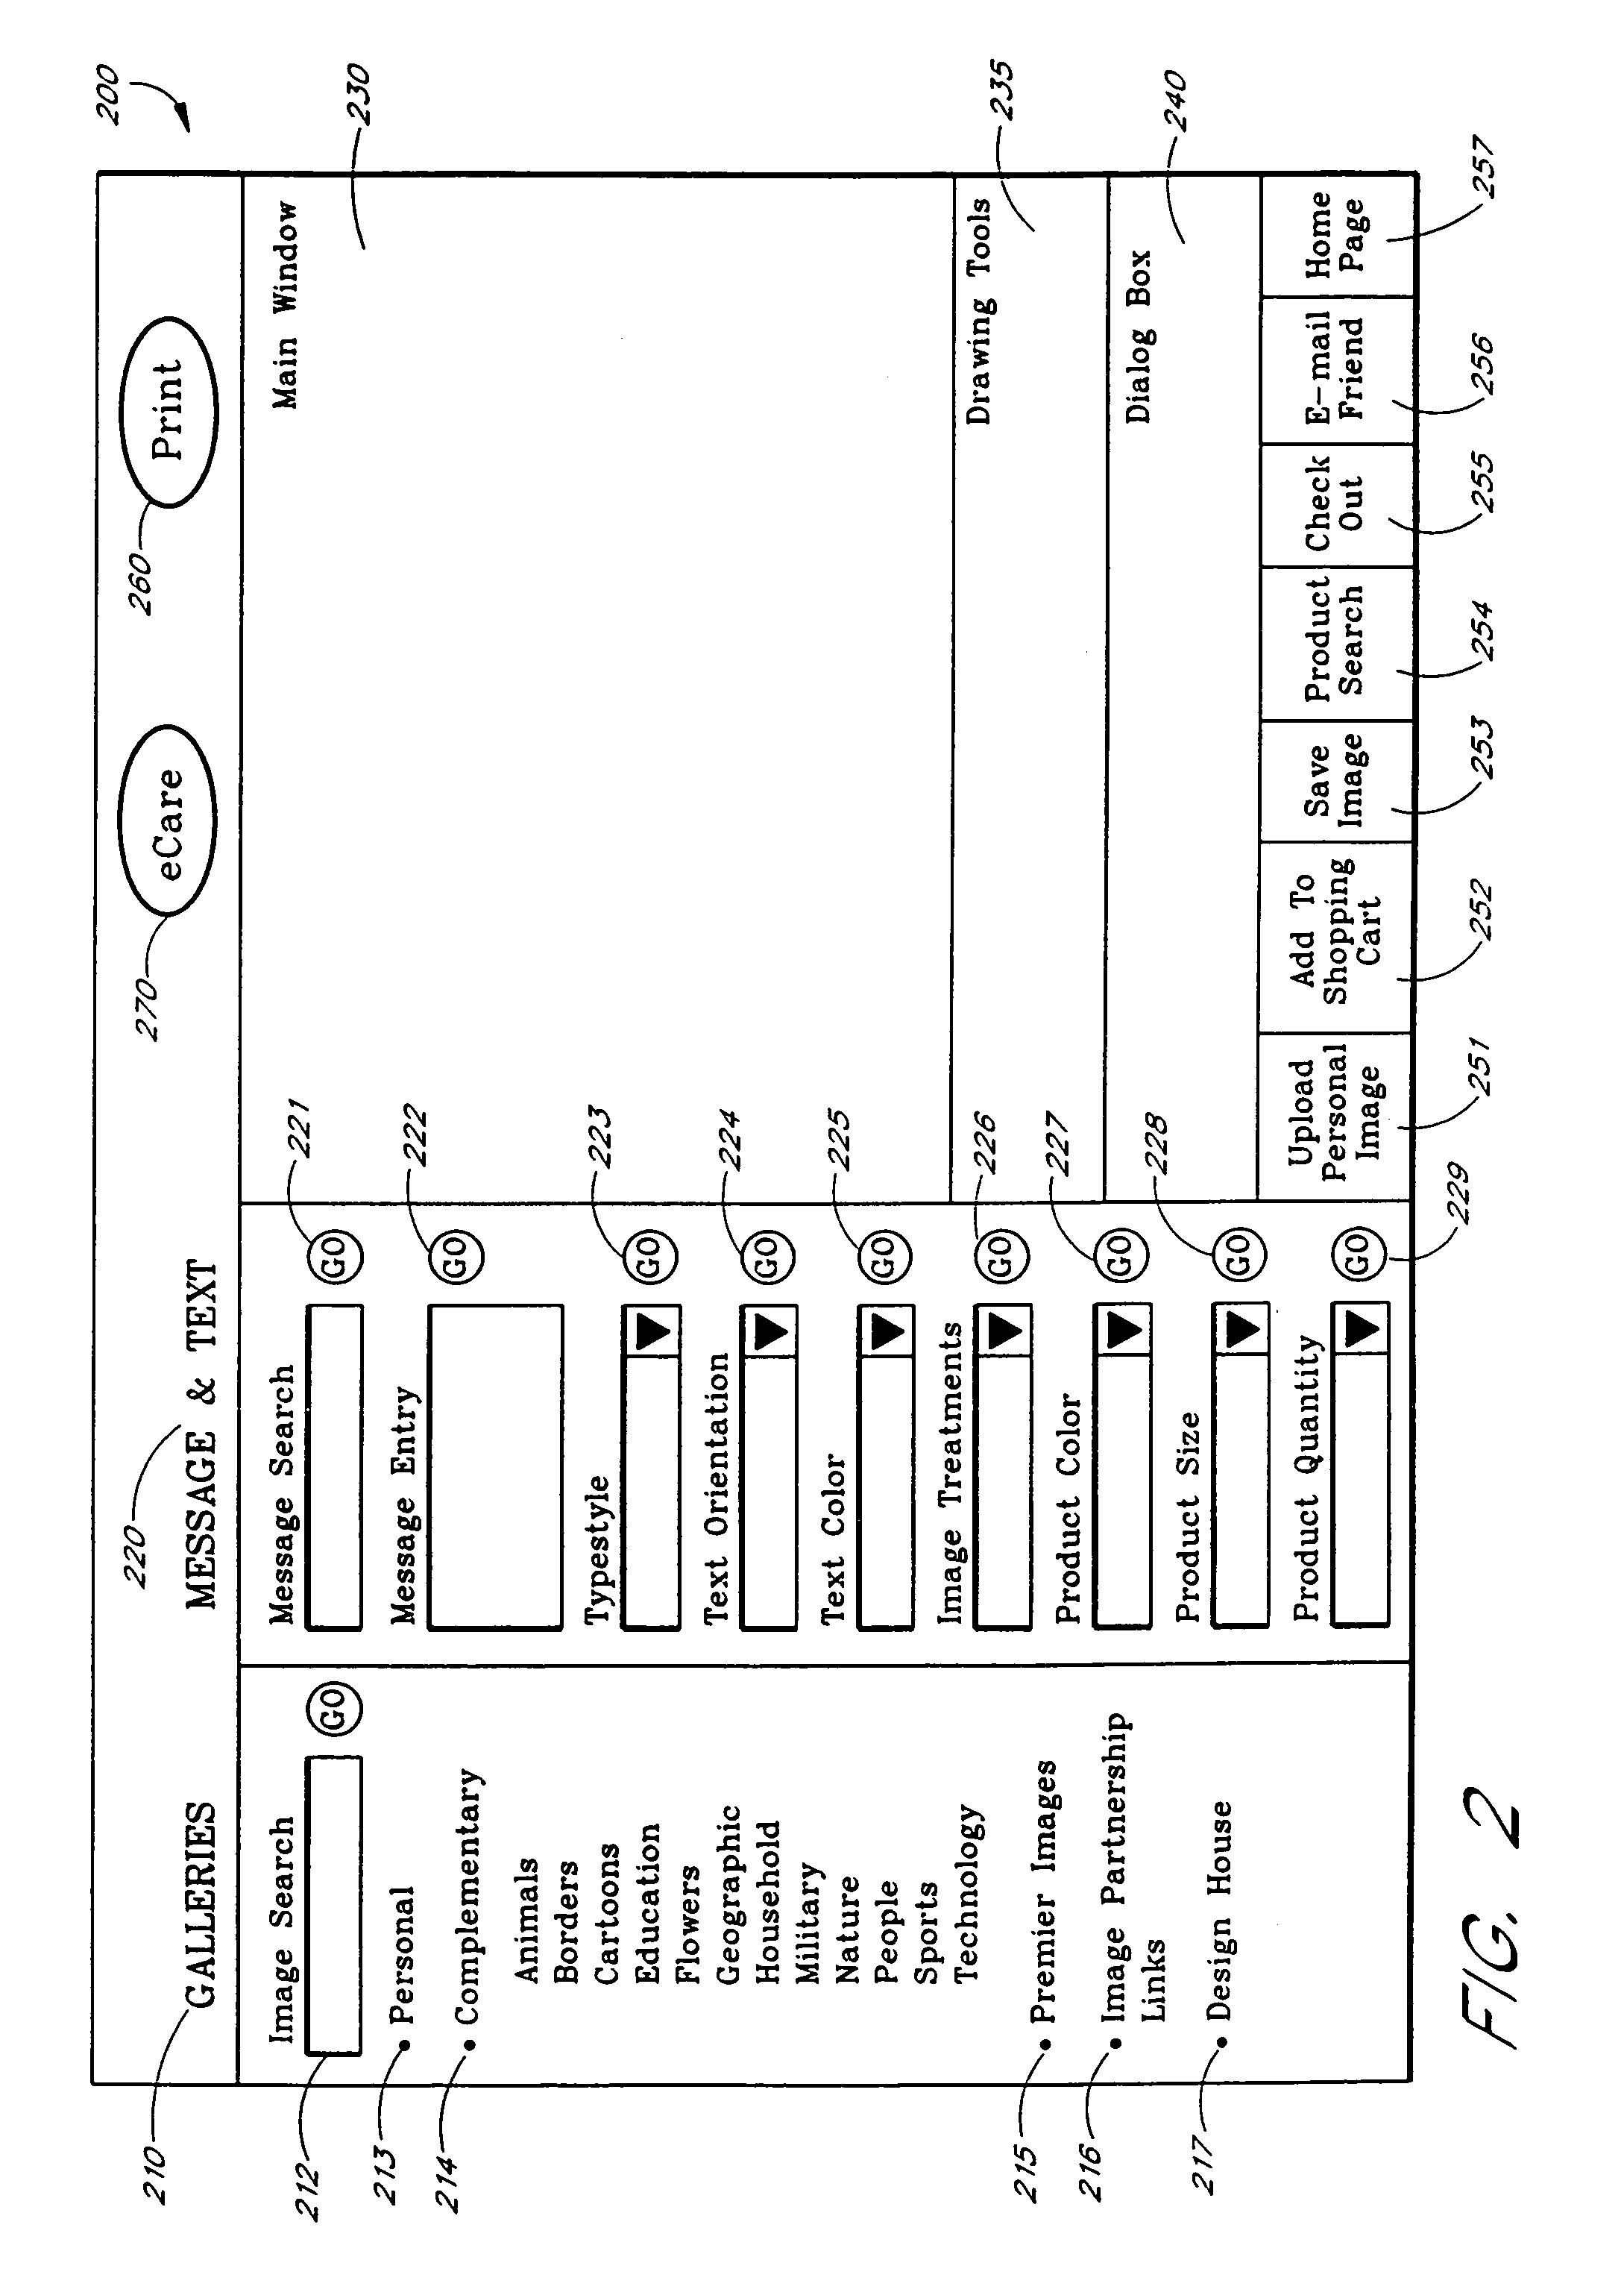 Intelligent personalization system and method